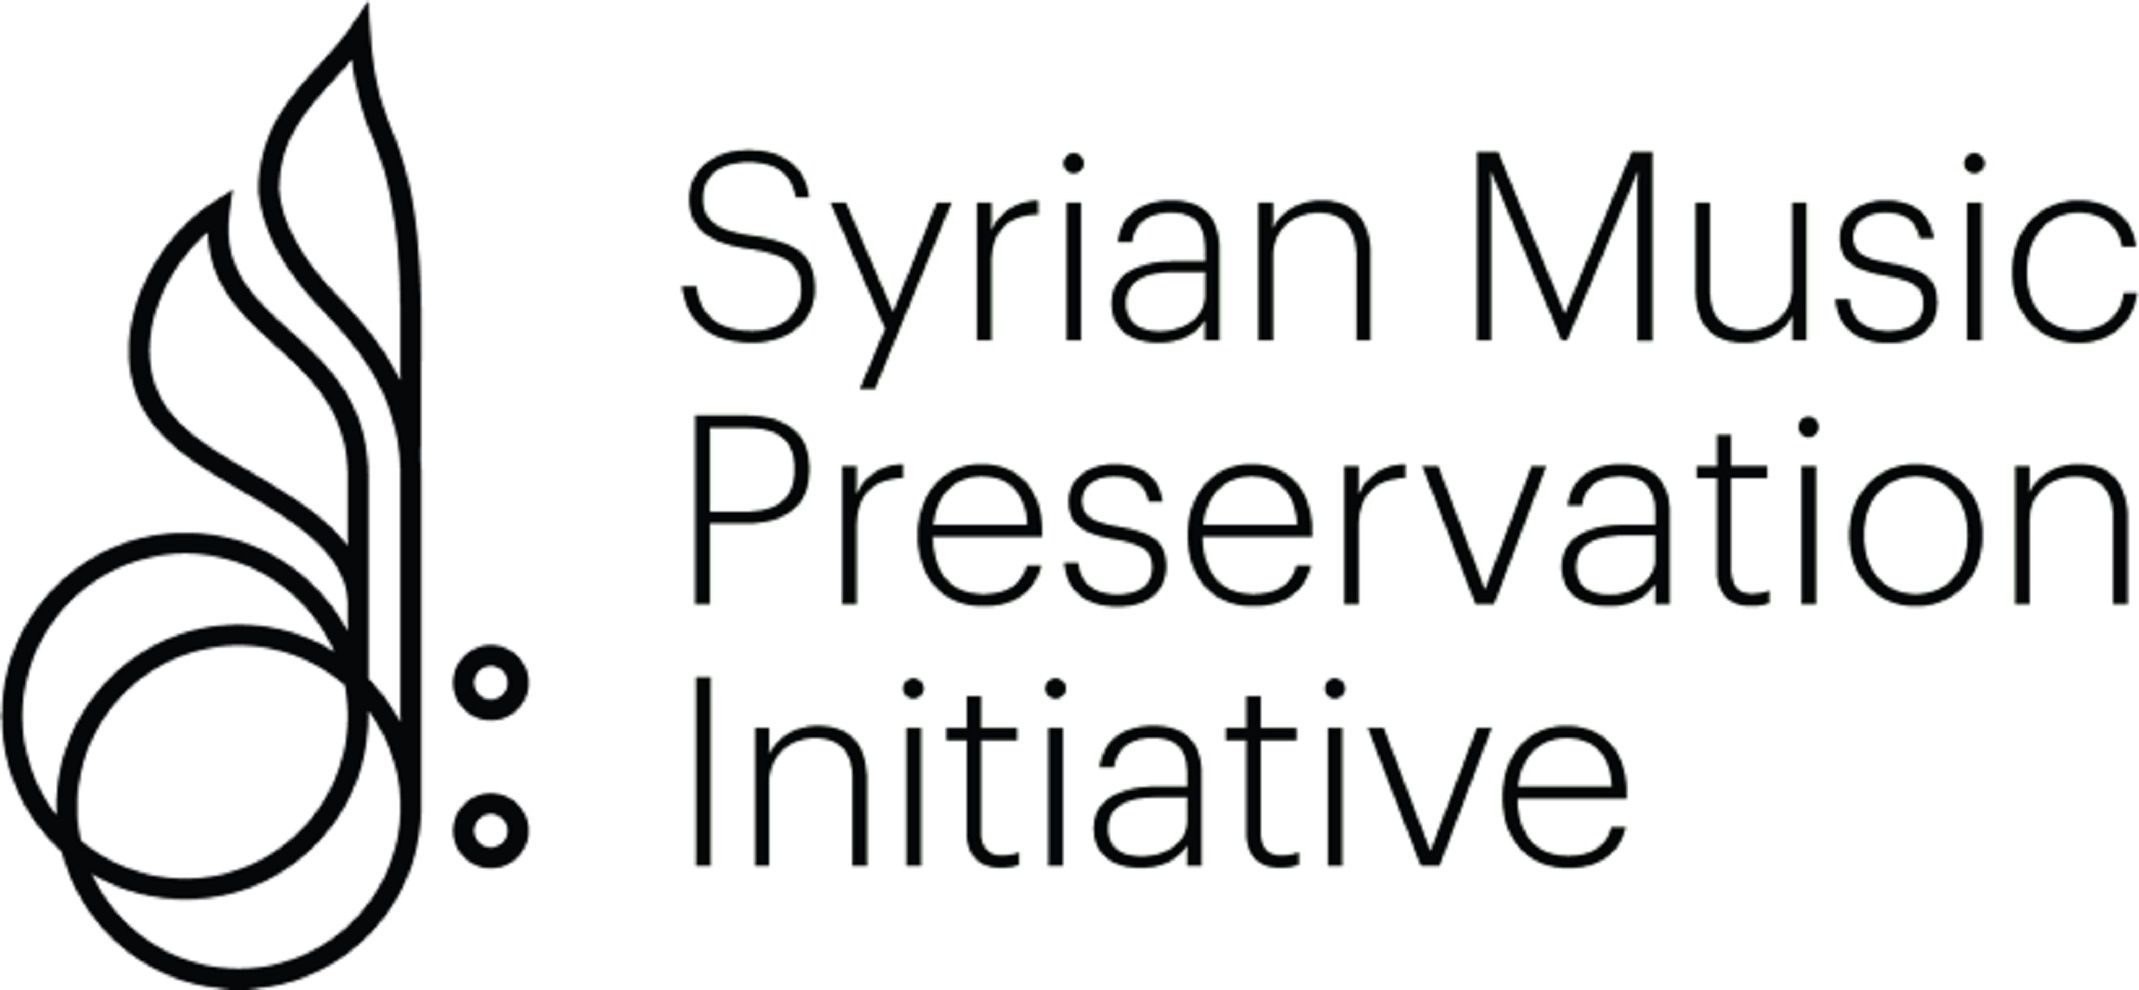 Syrian Music Preservation Initiative to Present Love and Loss: Traditional Music of Syria at Weill Recital Hall at Carnegie Hall